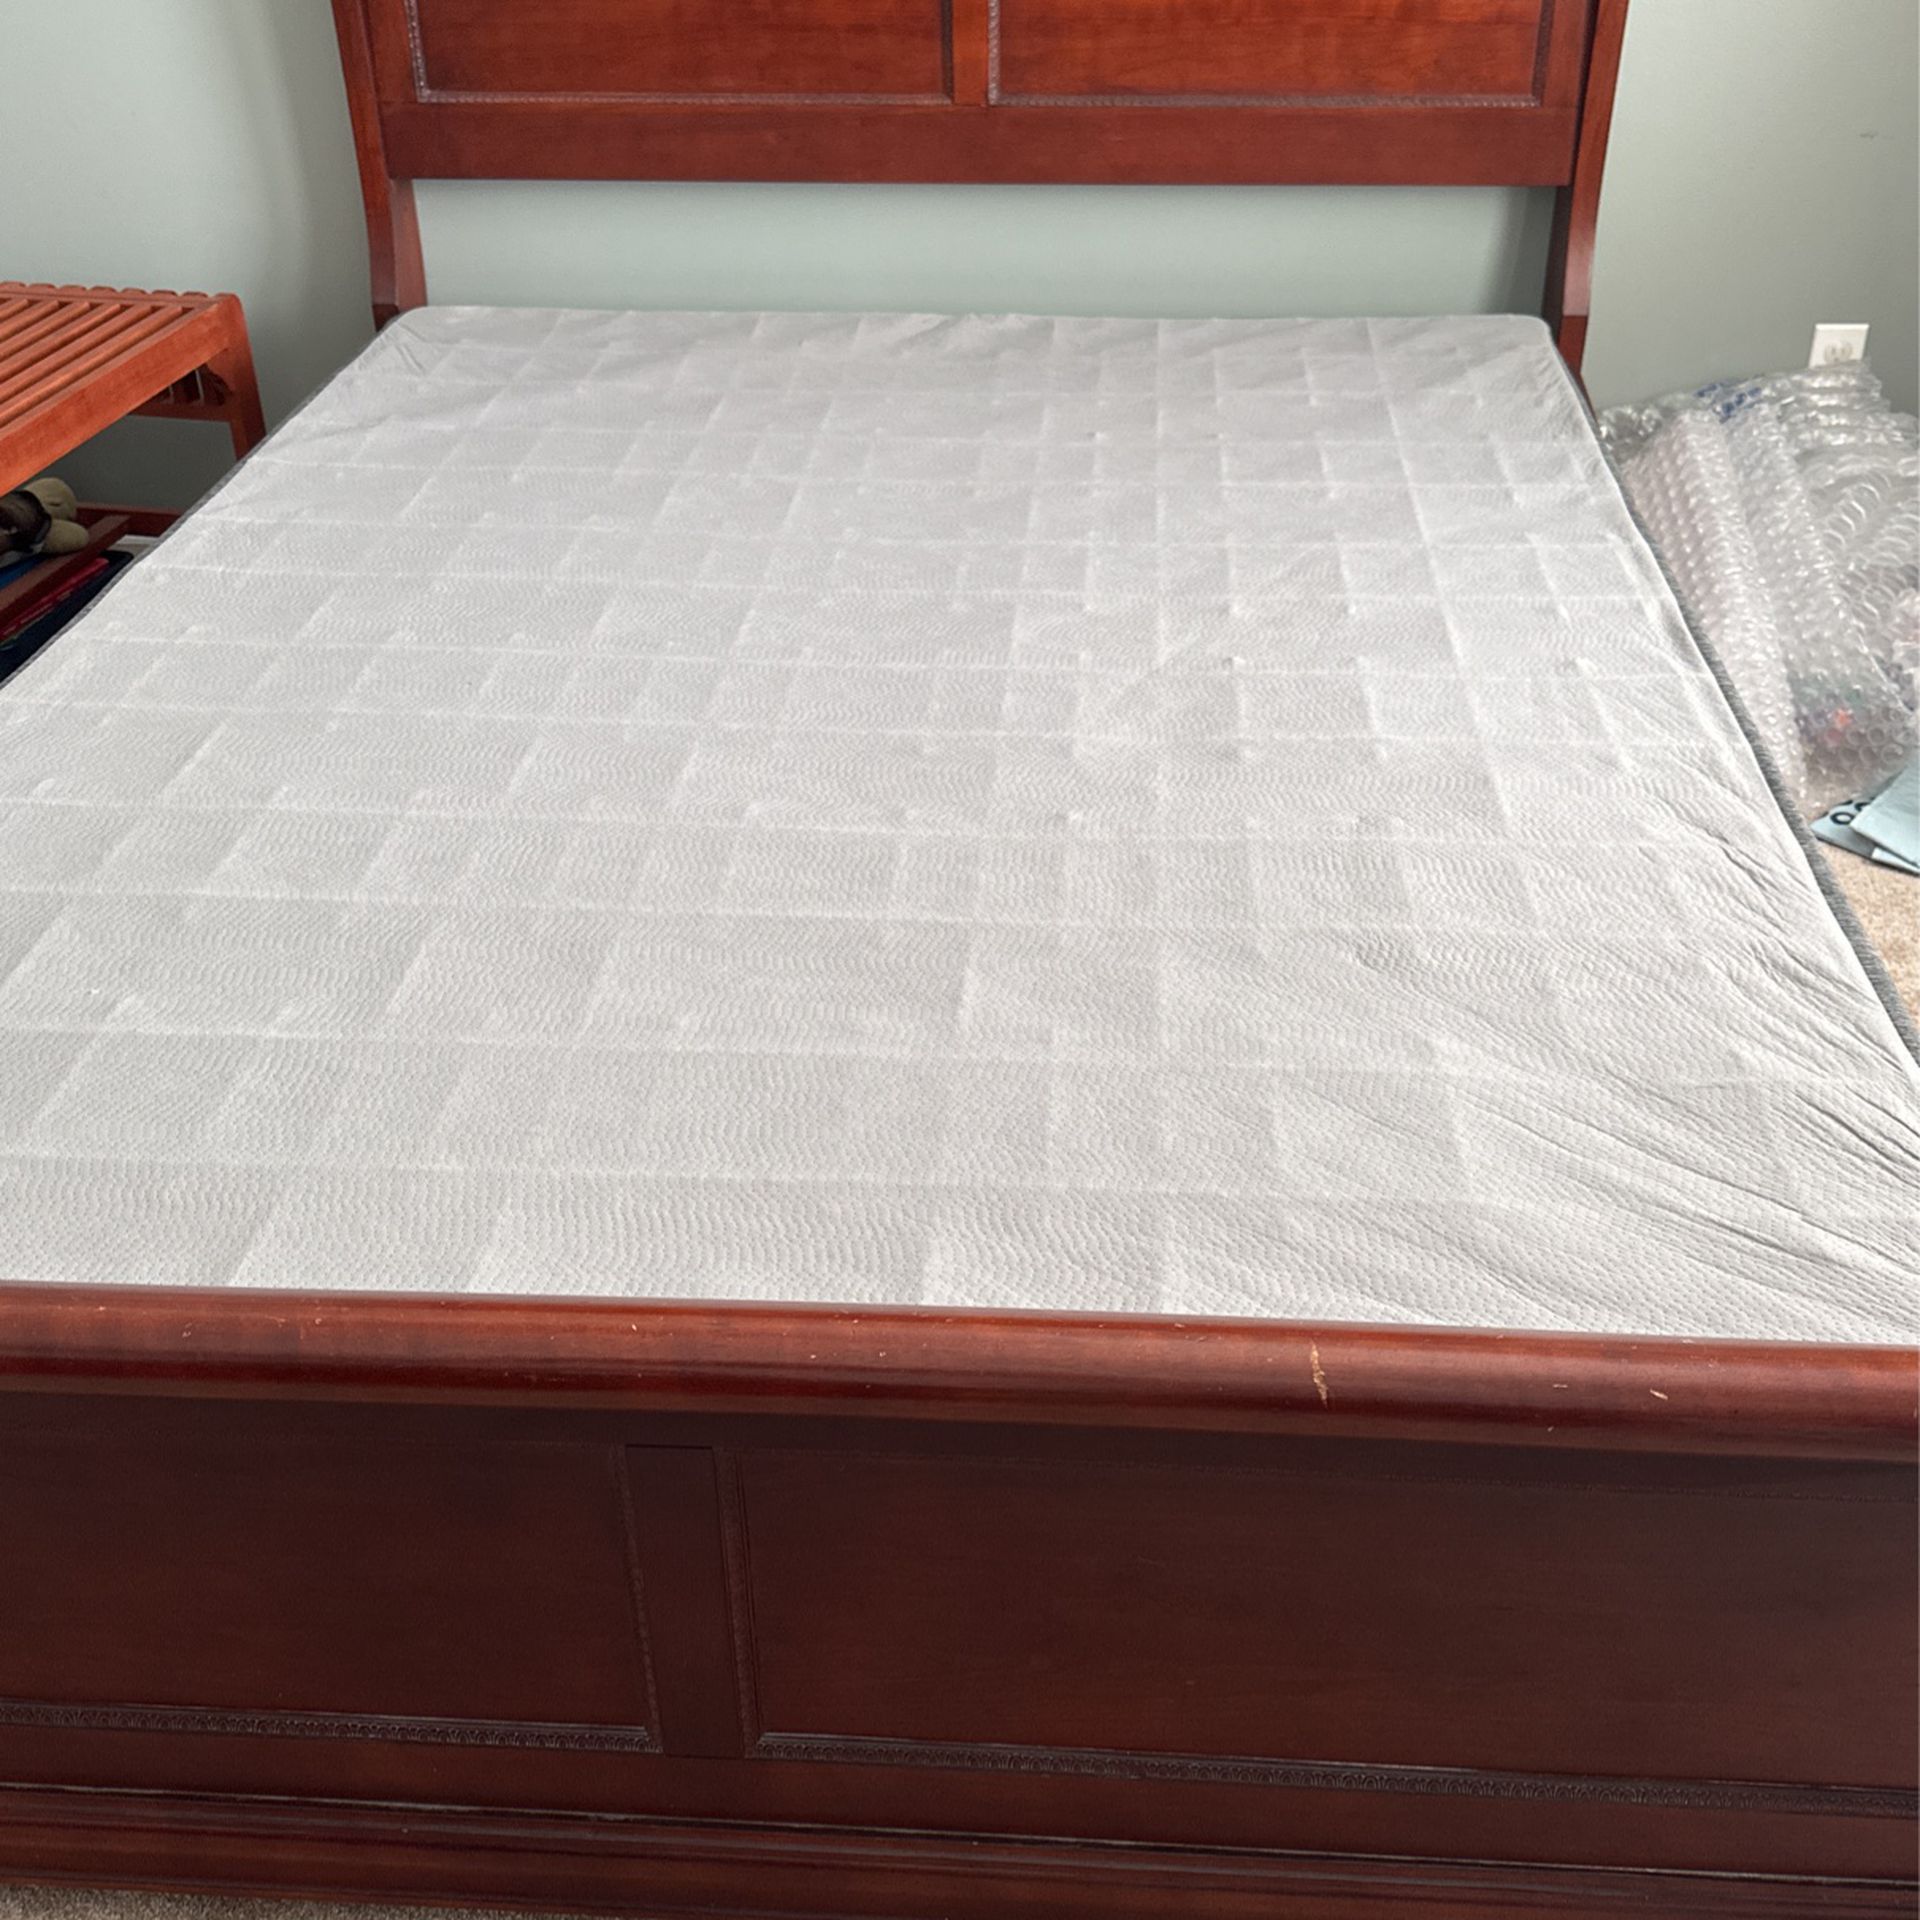 Queen Size Bed Frame And Box spring 